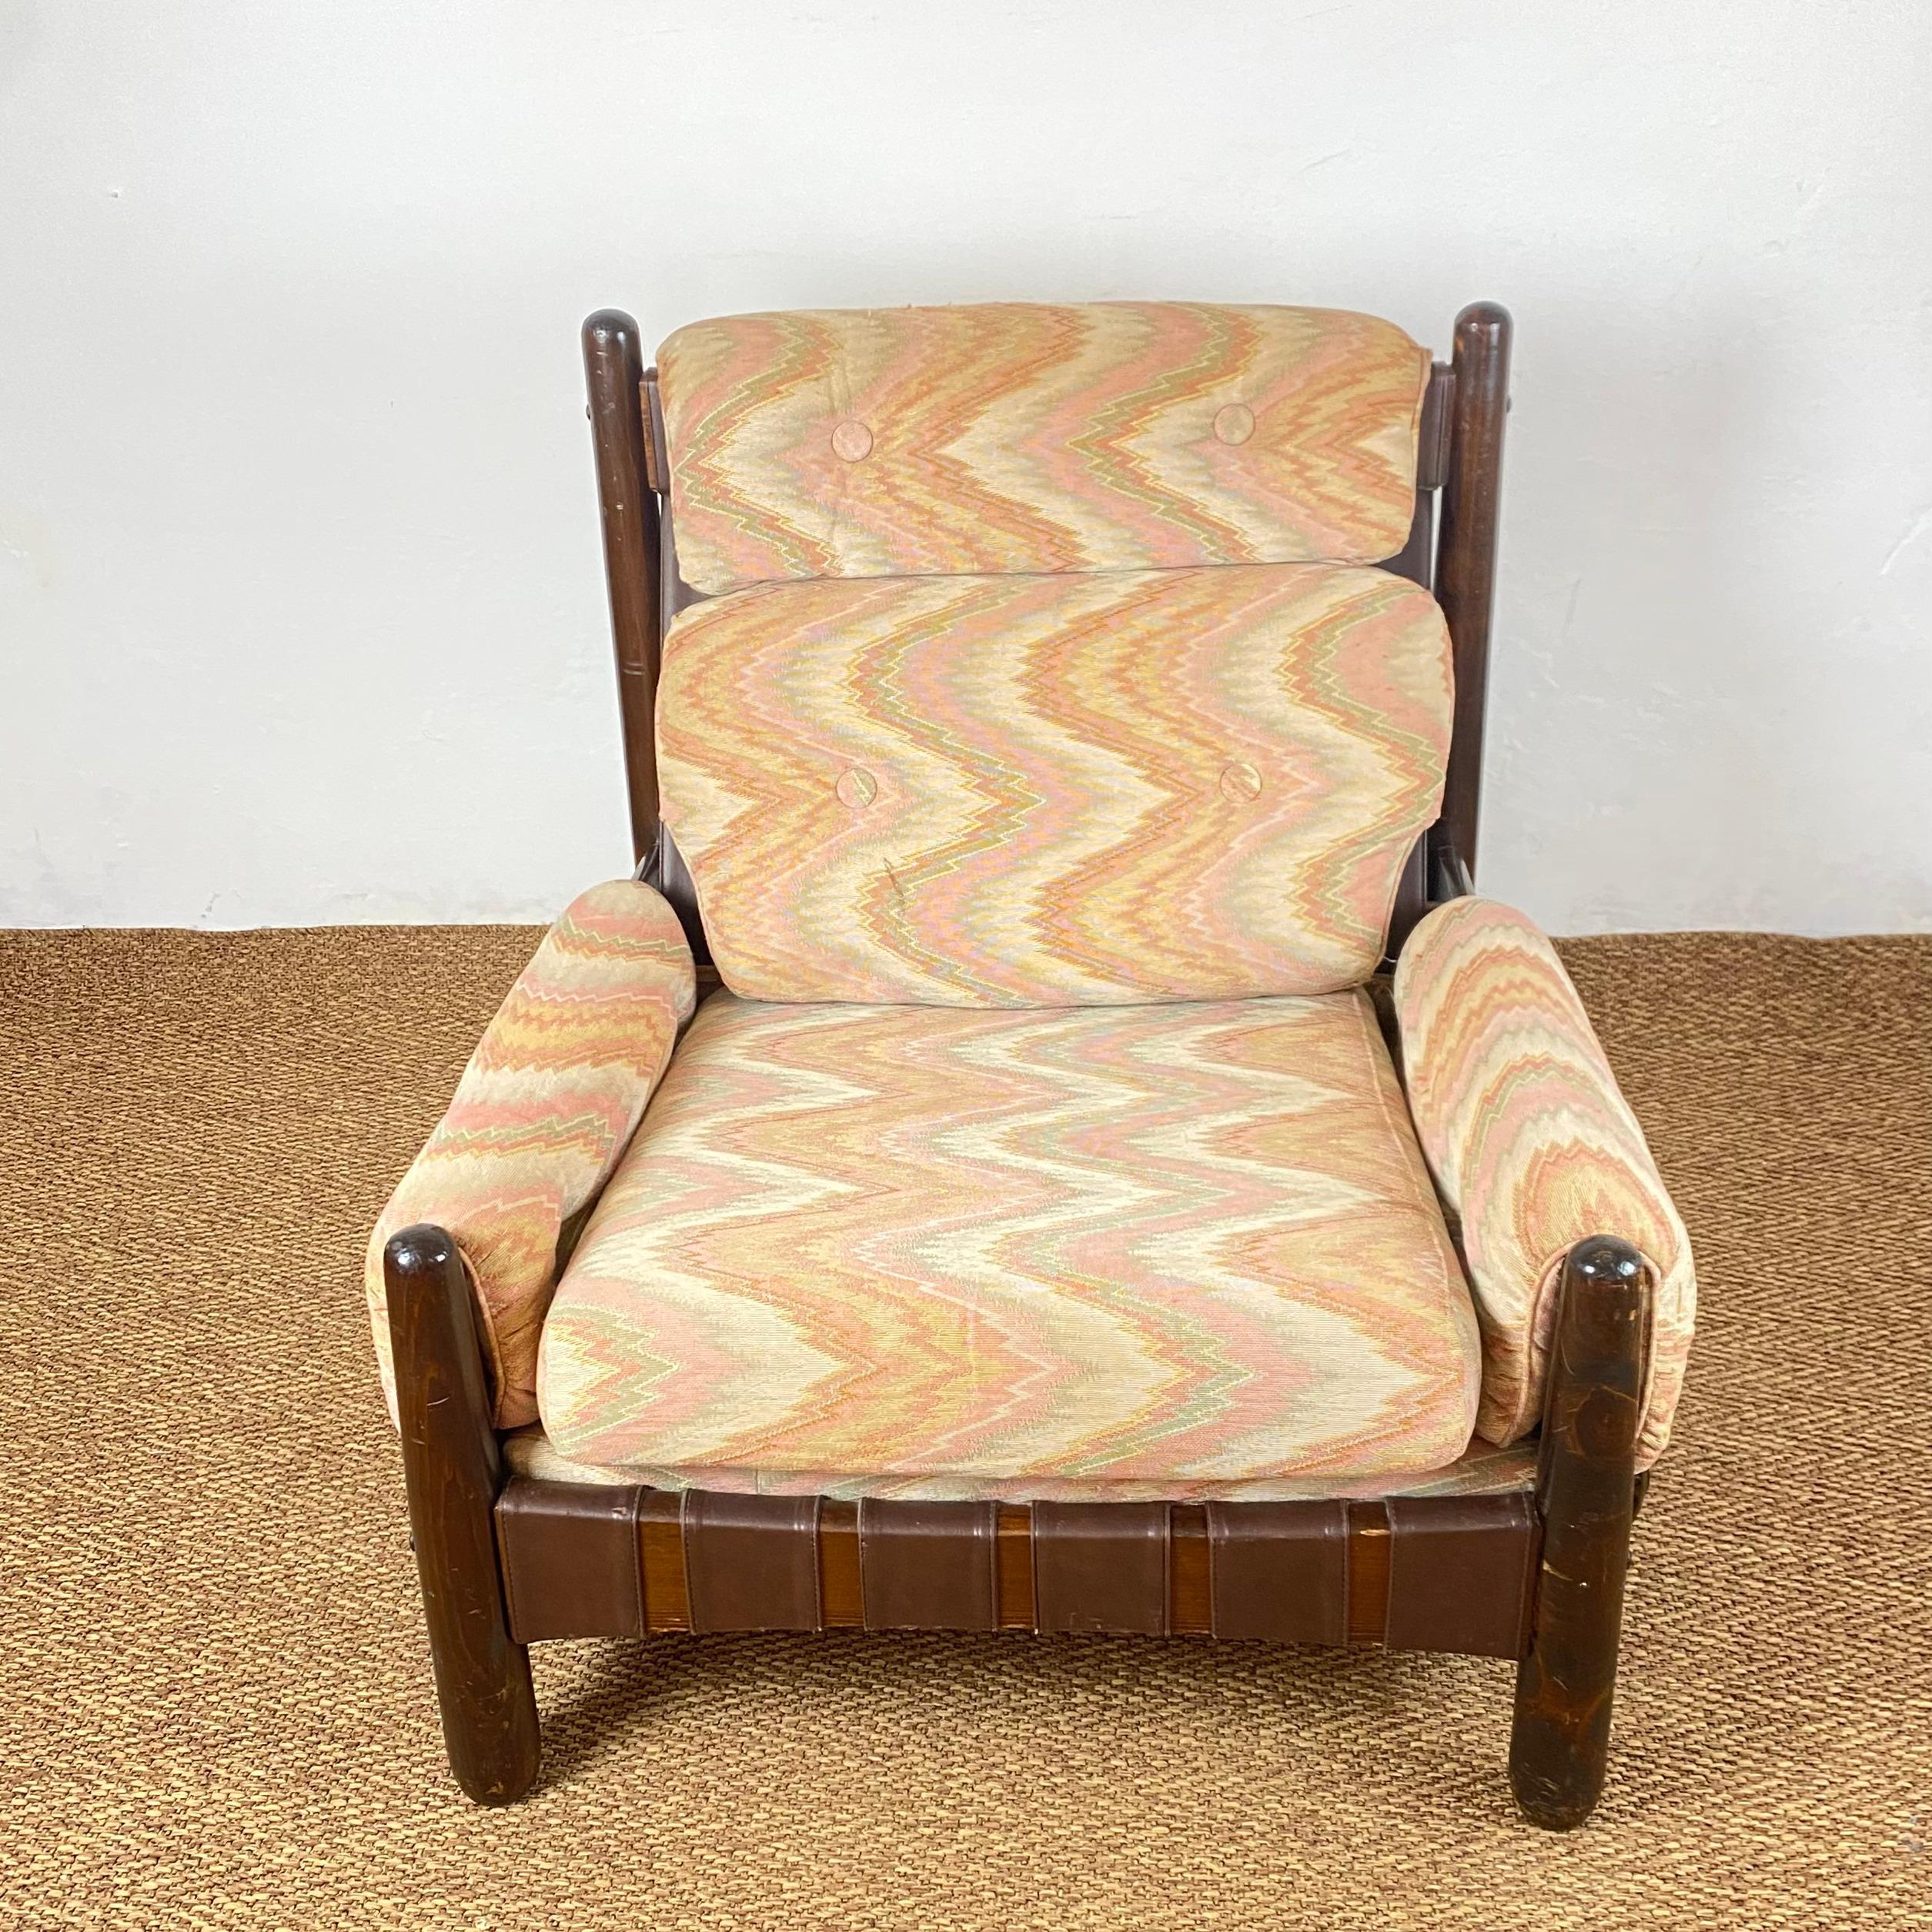 Superb and very rare armchair made by Pizzetti Roma from the 1950s in Italy.
The armchair is upholstered in Missoni fabric from the late 70s and is in perfect vintage condition with small signs of aging as shown in the photographs.